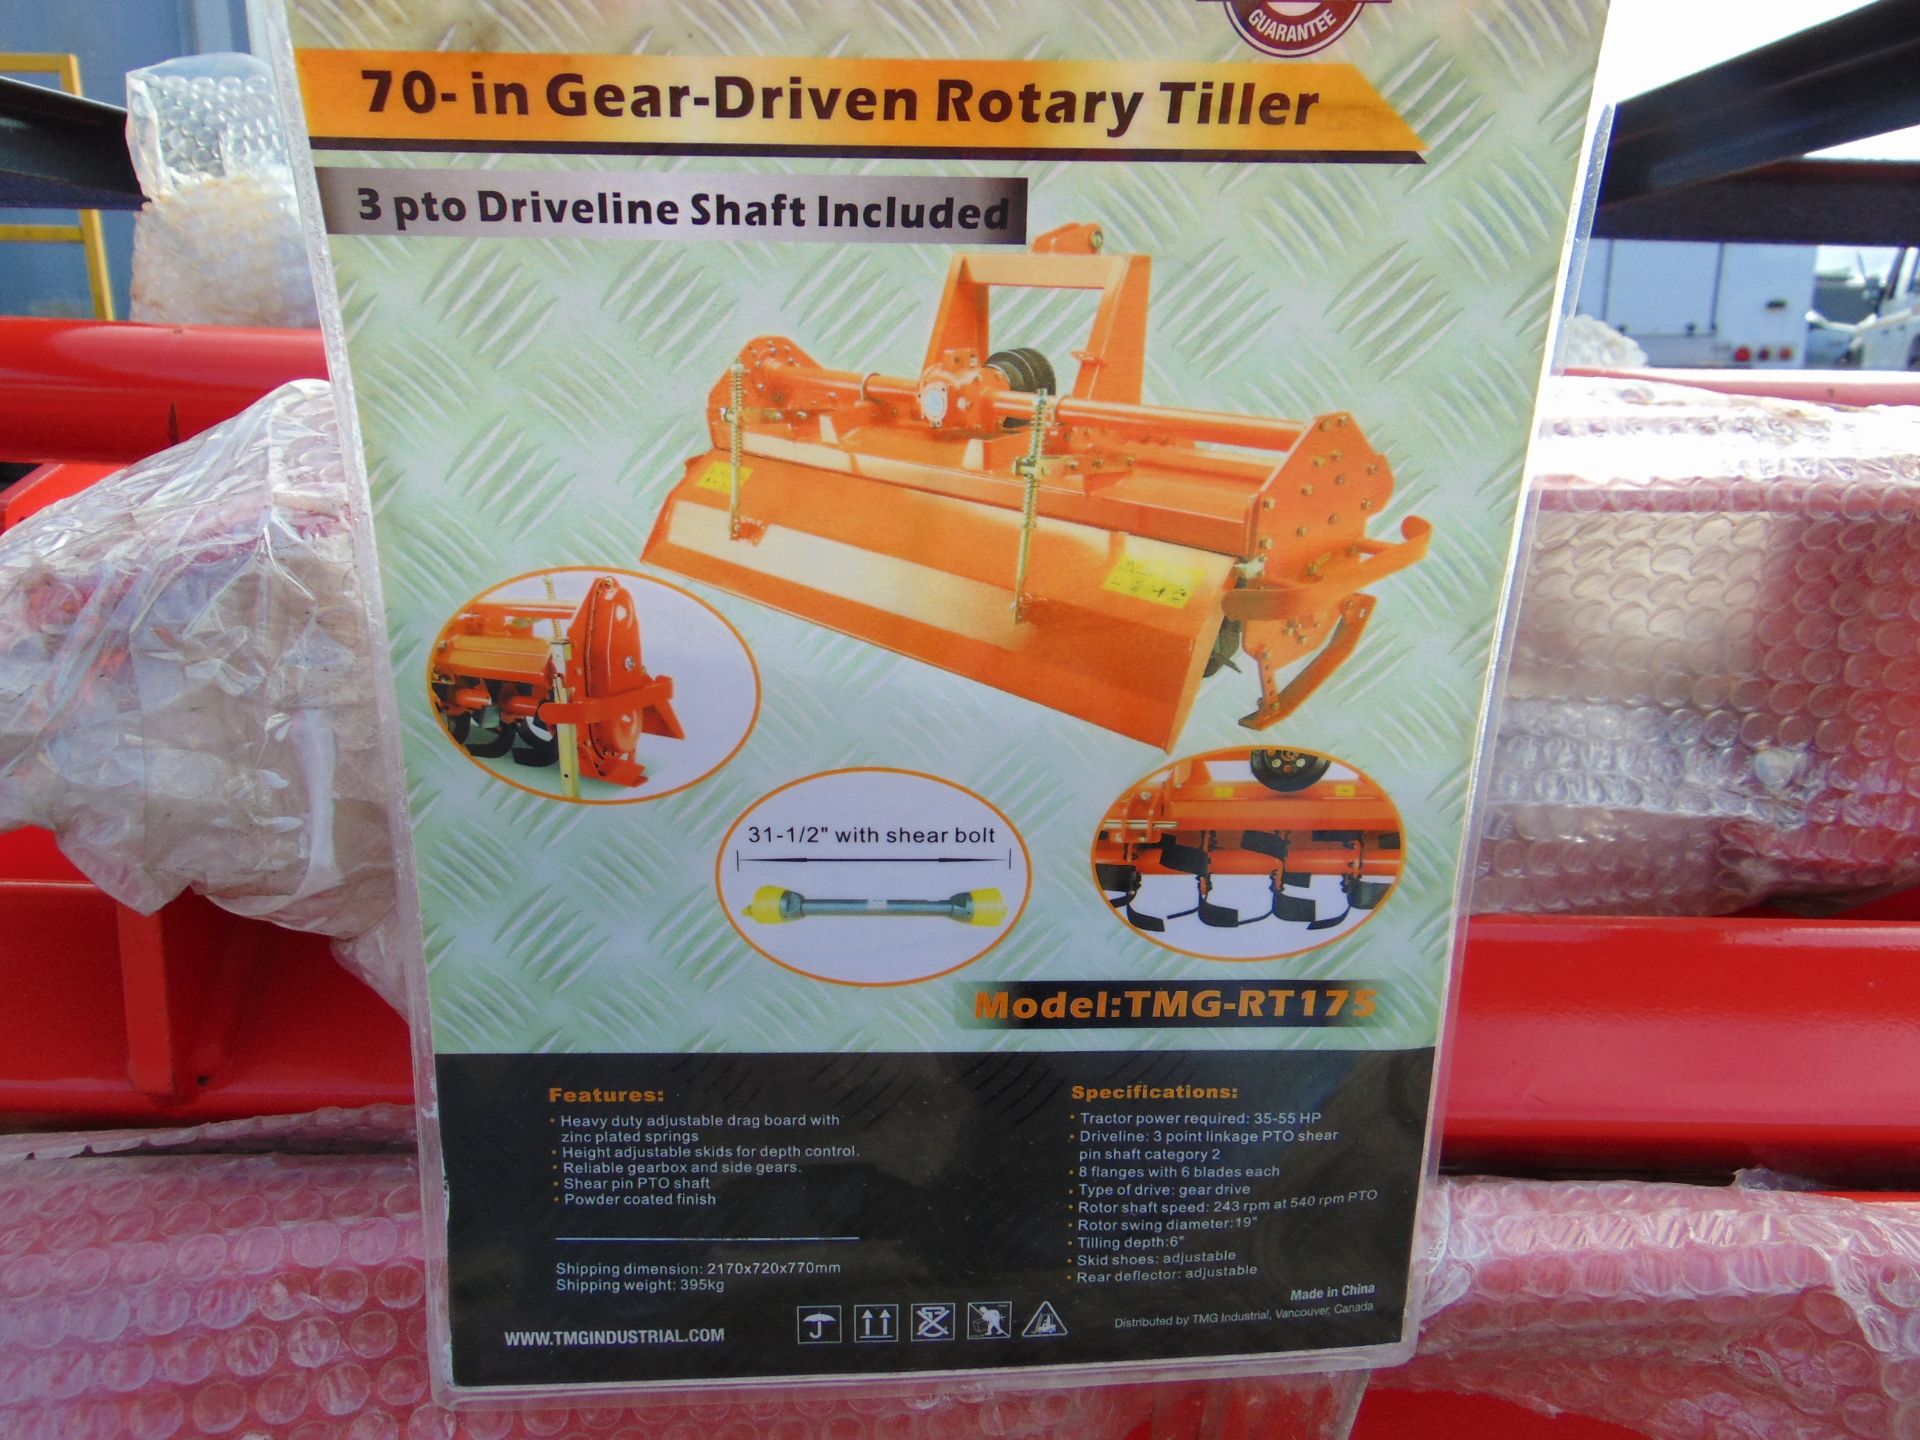 ** BRAND NEW ** TMG-RT175 Rotary Tiller 3 Point Hitch Mount Gear-Driven 70'' Working Width - Image 6 of 6